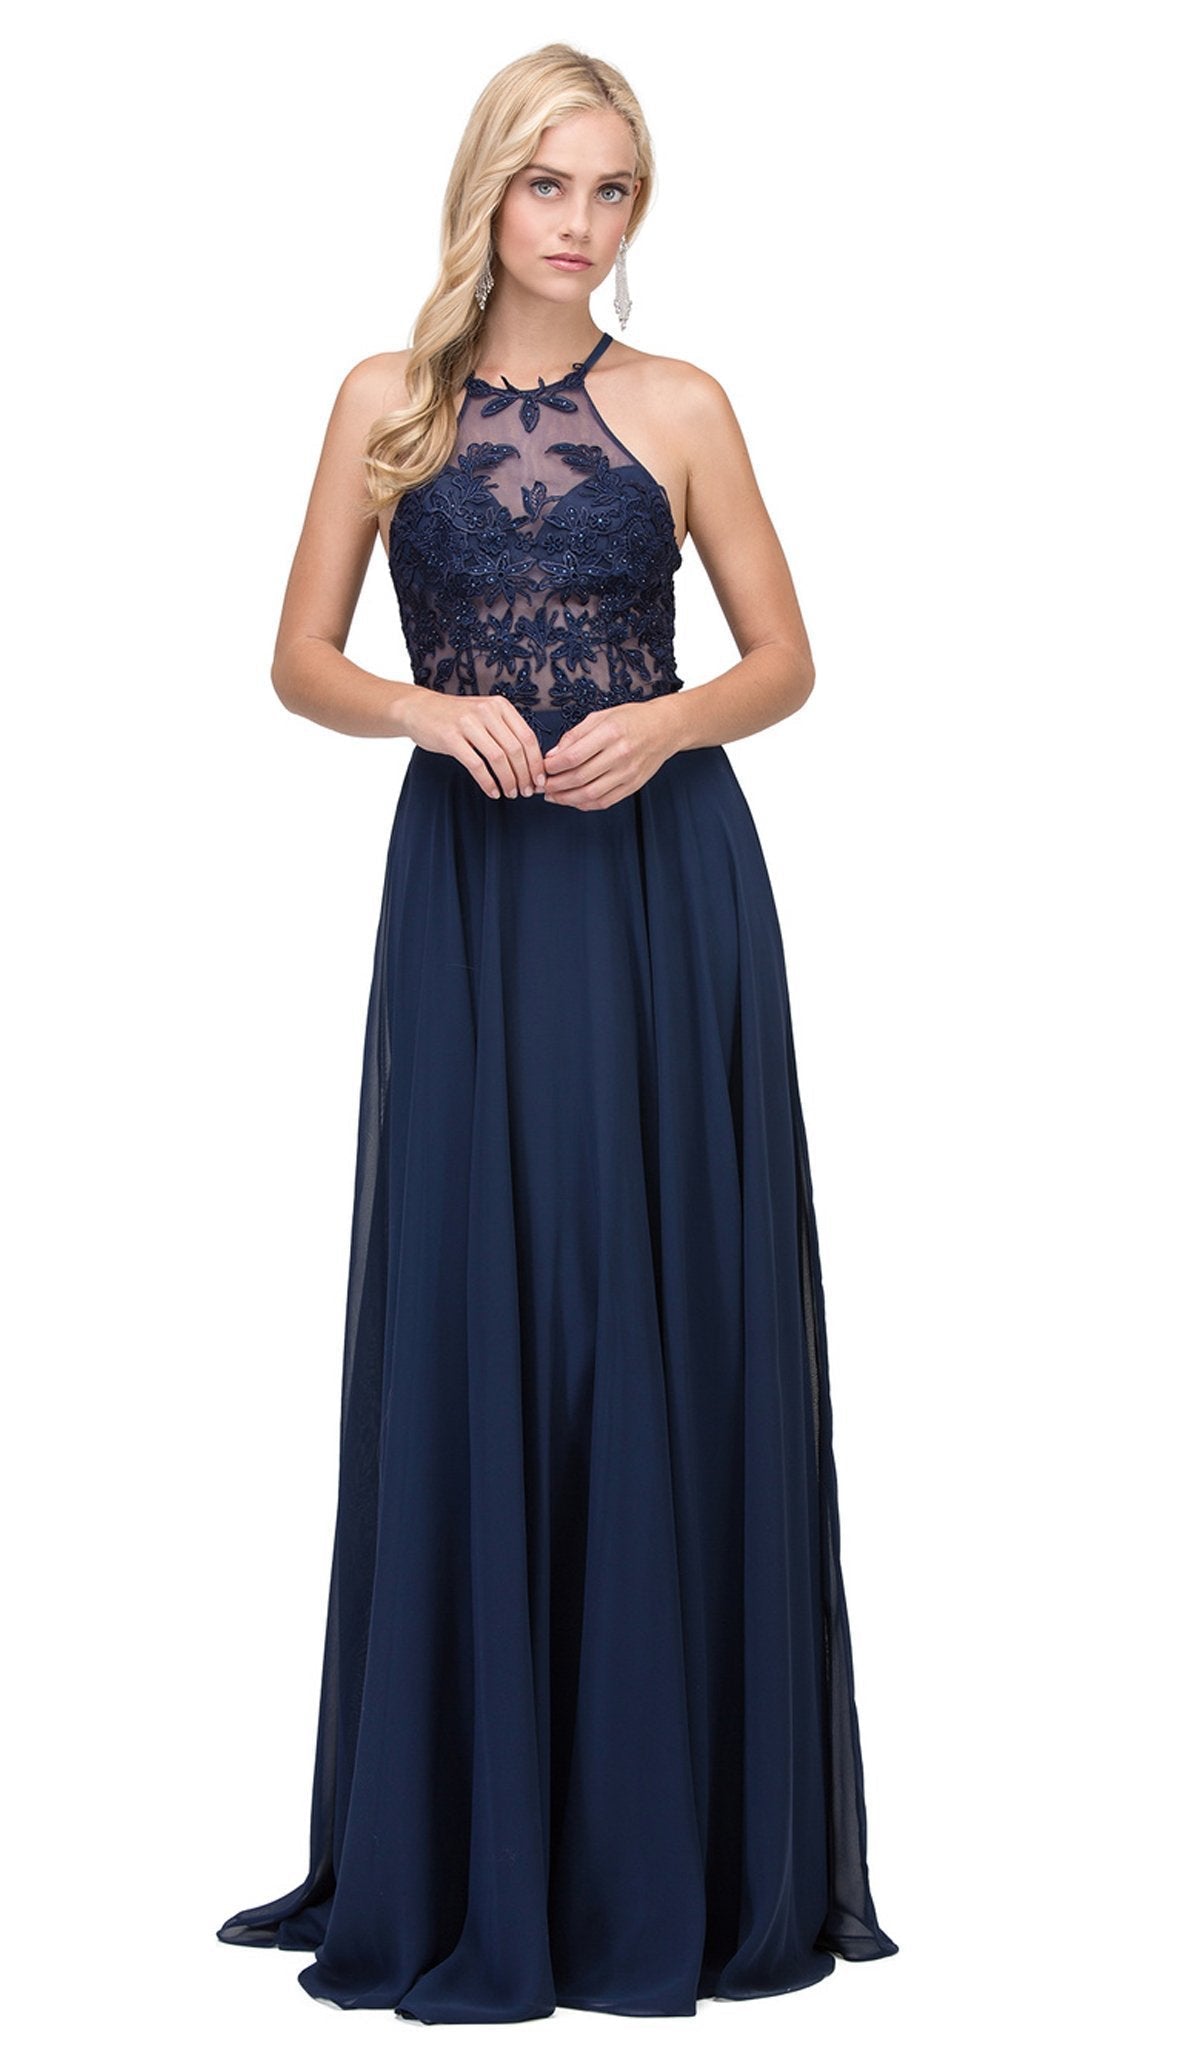 Dancing Queen - 2369 Embroidered Sheer Halter Chiffon Prom Dress Special Occasion Dress XS / Navy